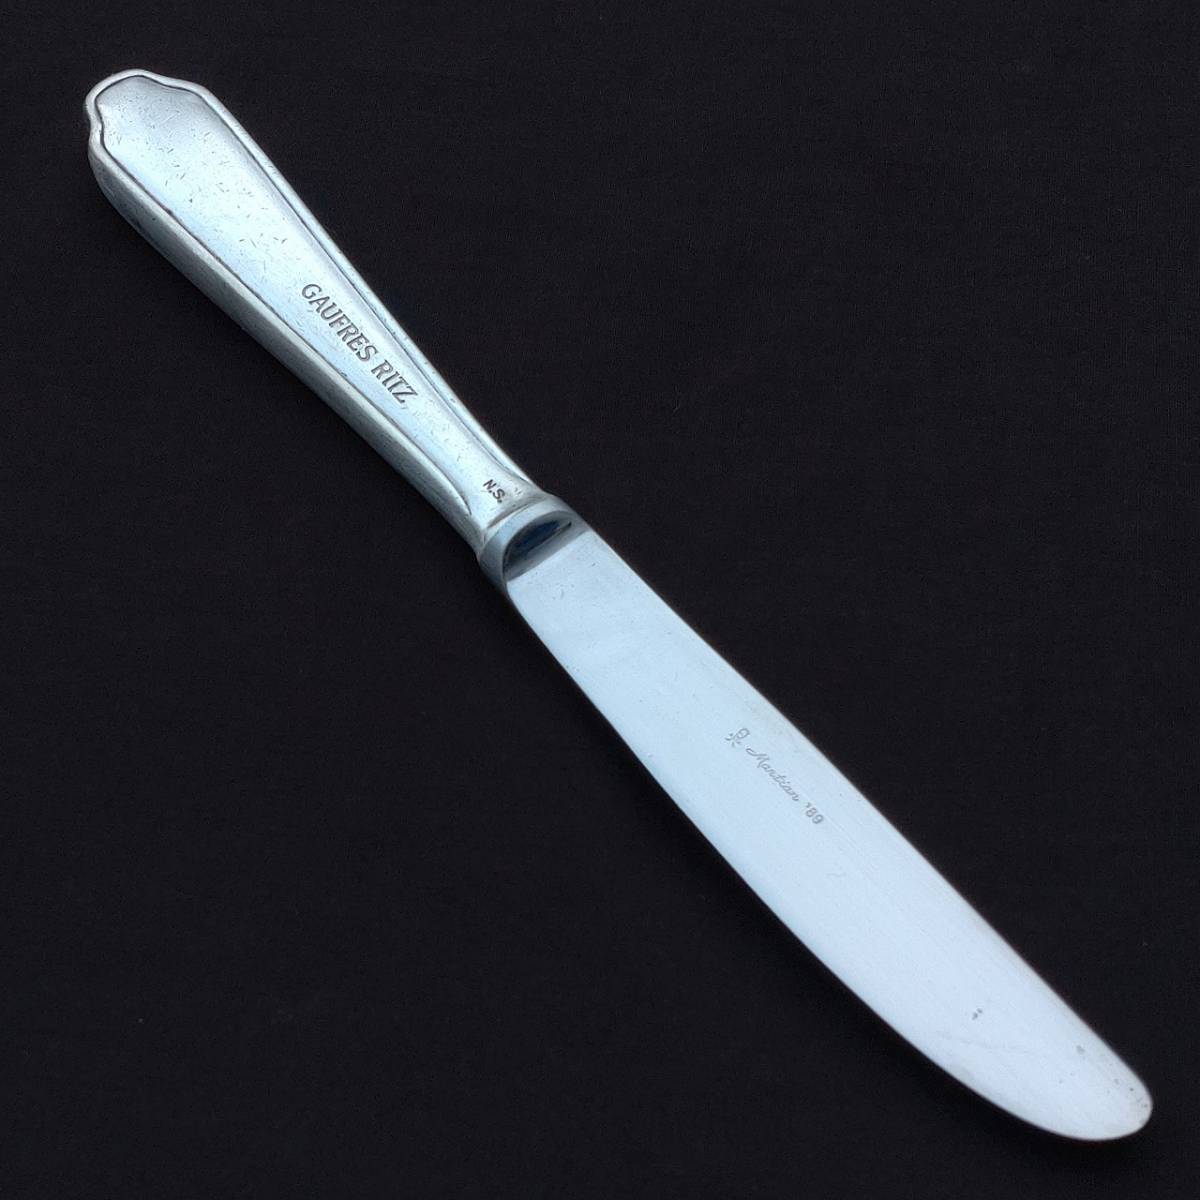  table knife steak knife GAUFRES RITZ N.S. Martian \'89 blade length approximately 105. total length approximately 220. cutlery [4645]